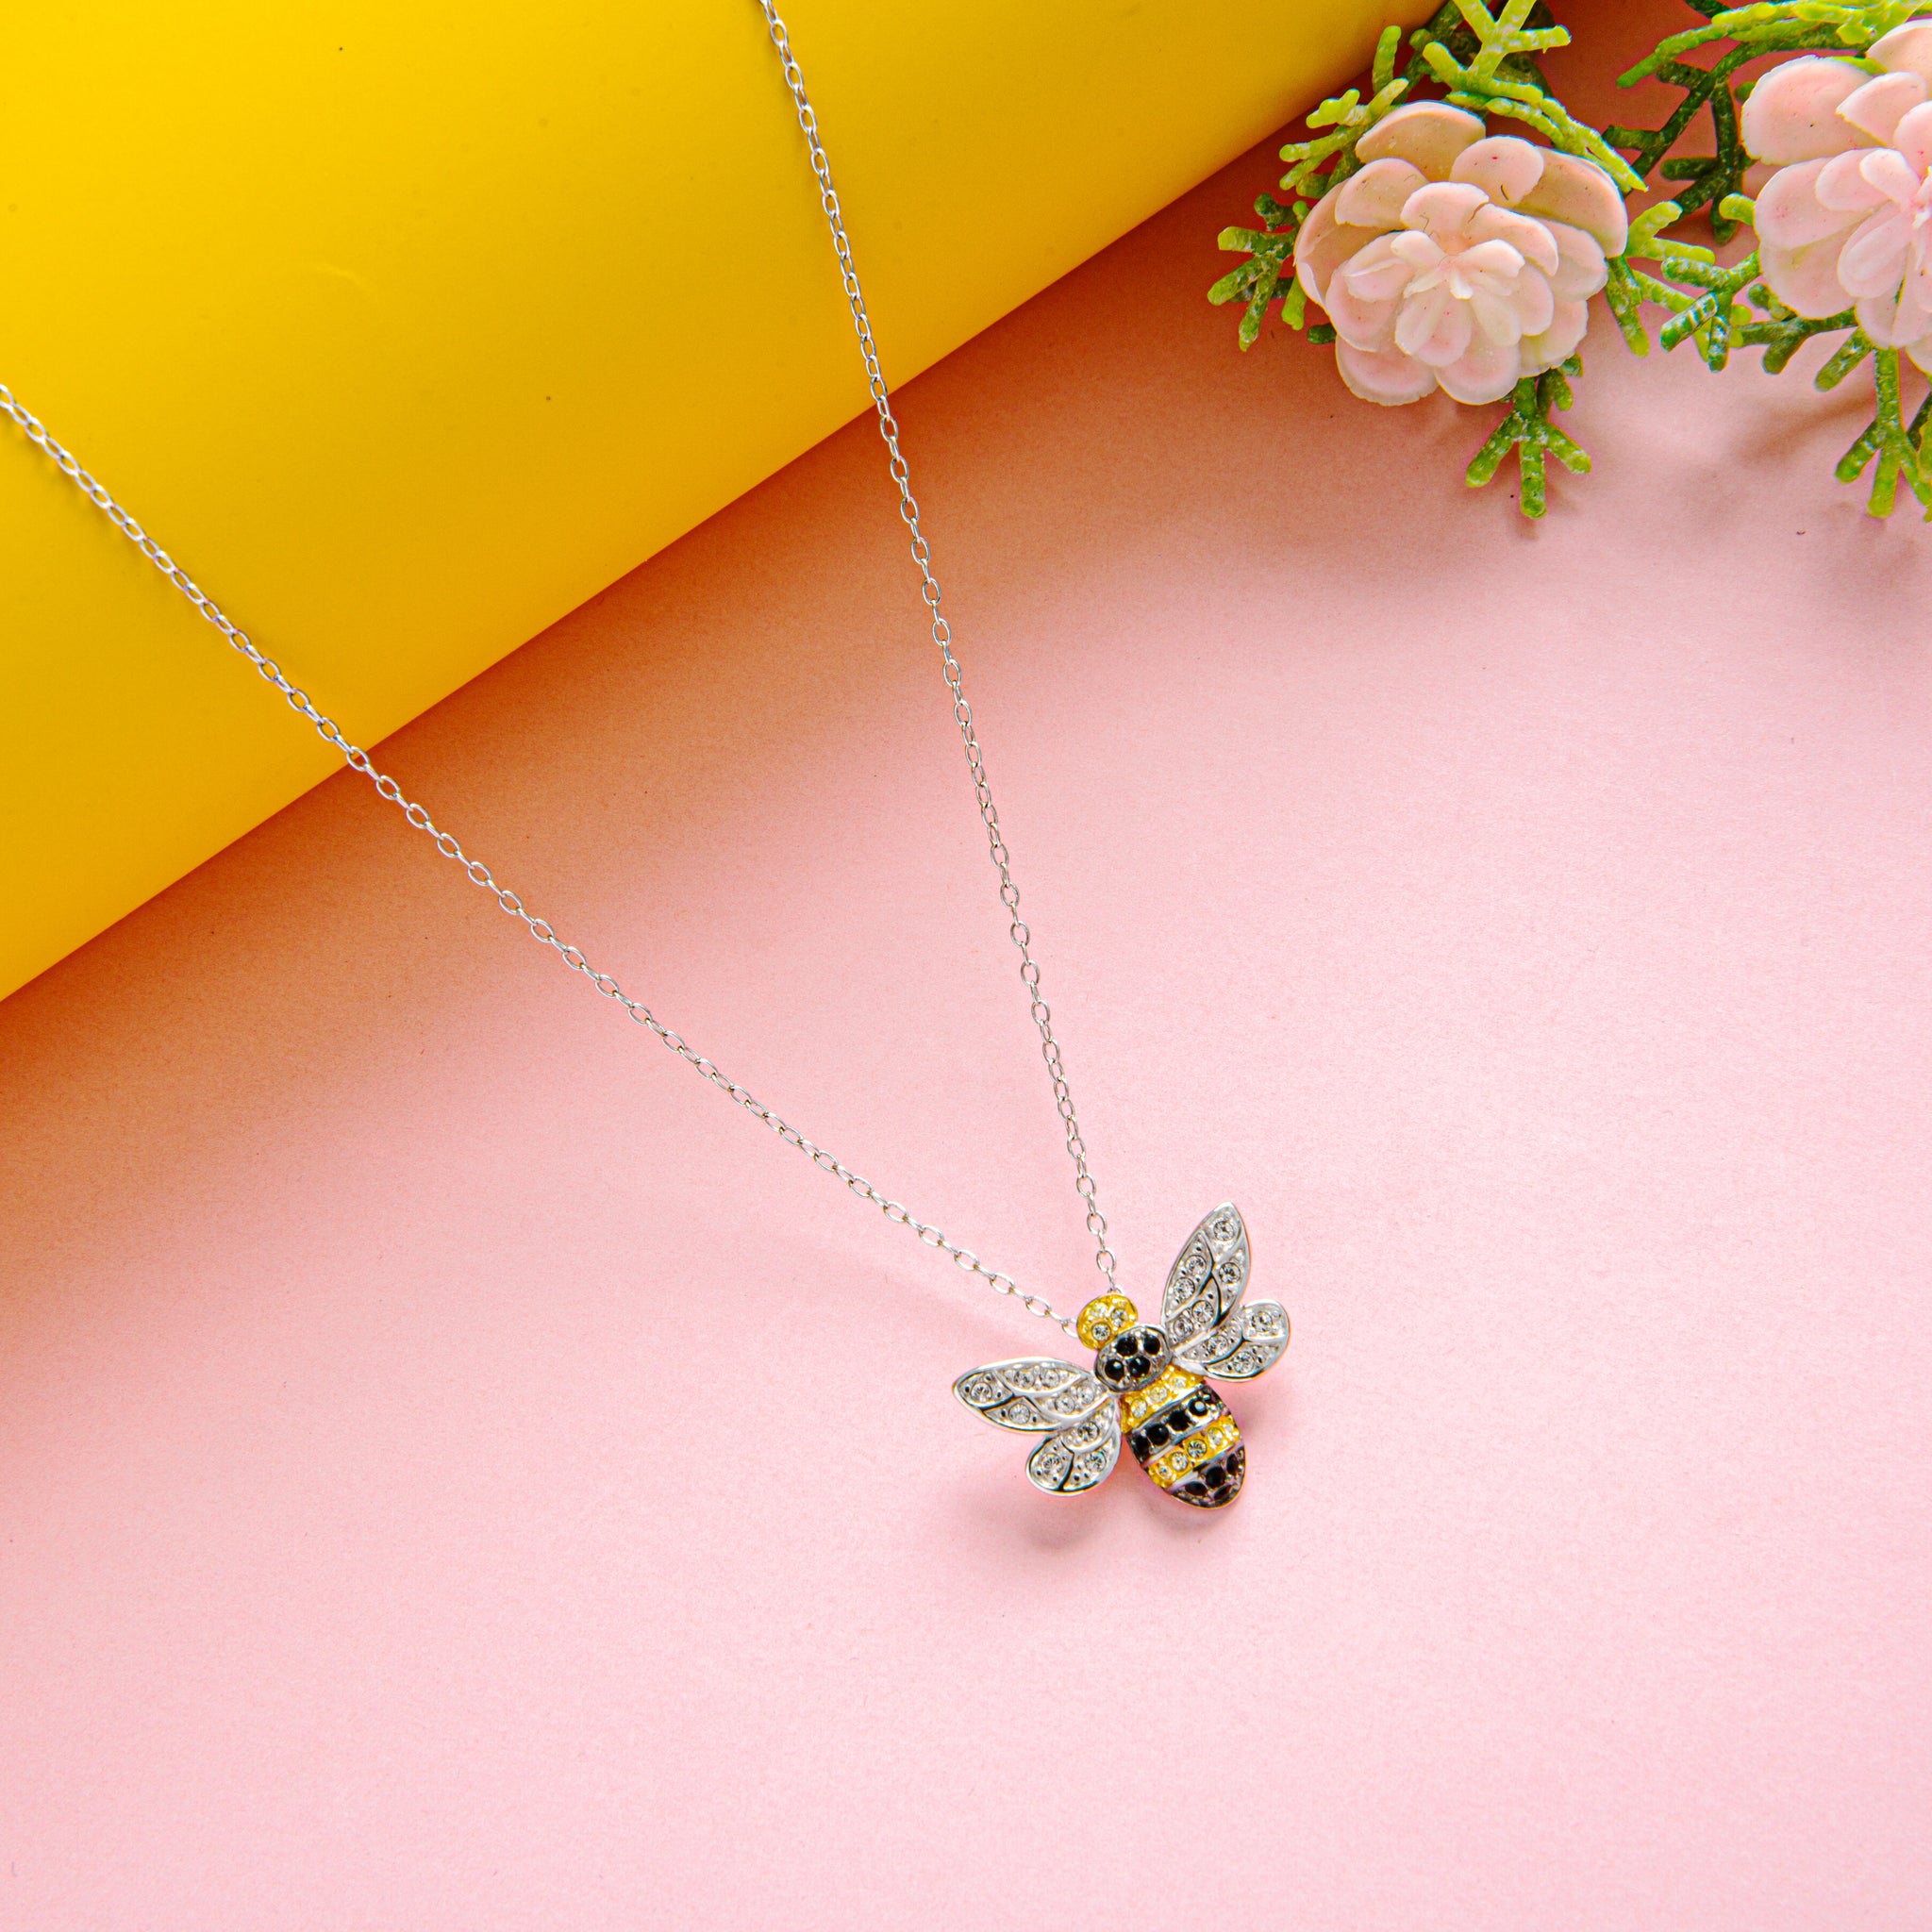 Gothic -style Golden Bee Necklace With Swarovski Crystal | Controse Jewelry  | Bee necklace, Swarovski crystals, Necklace